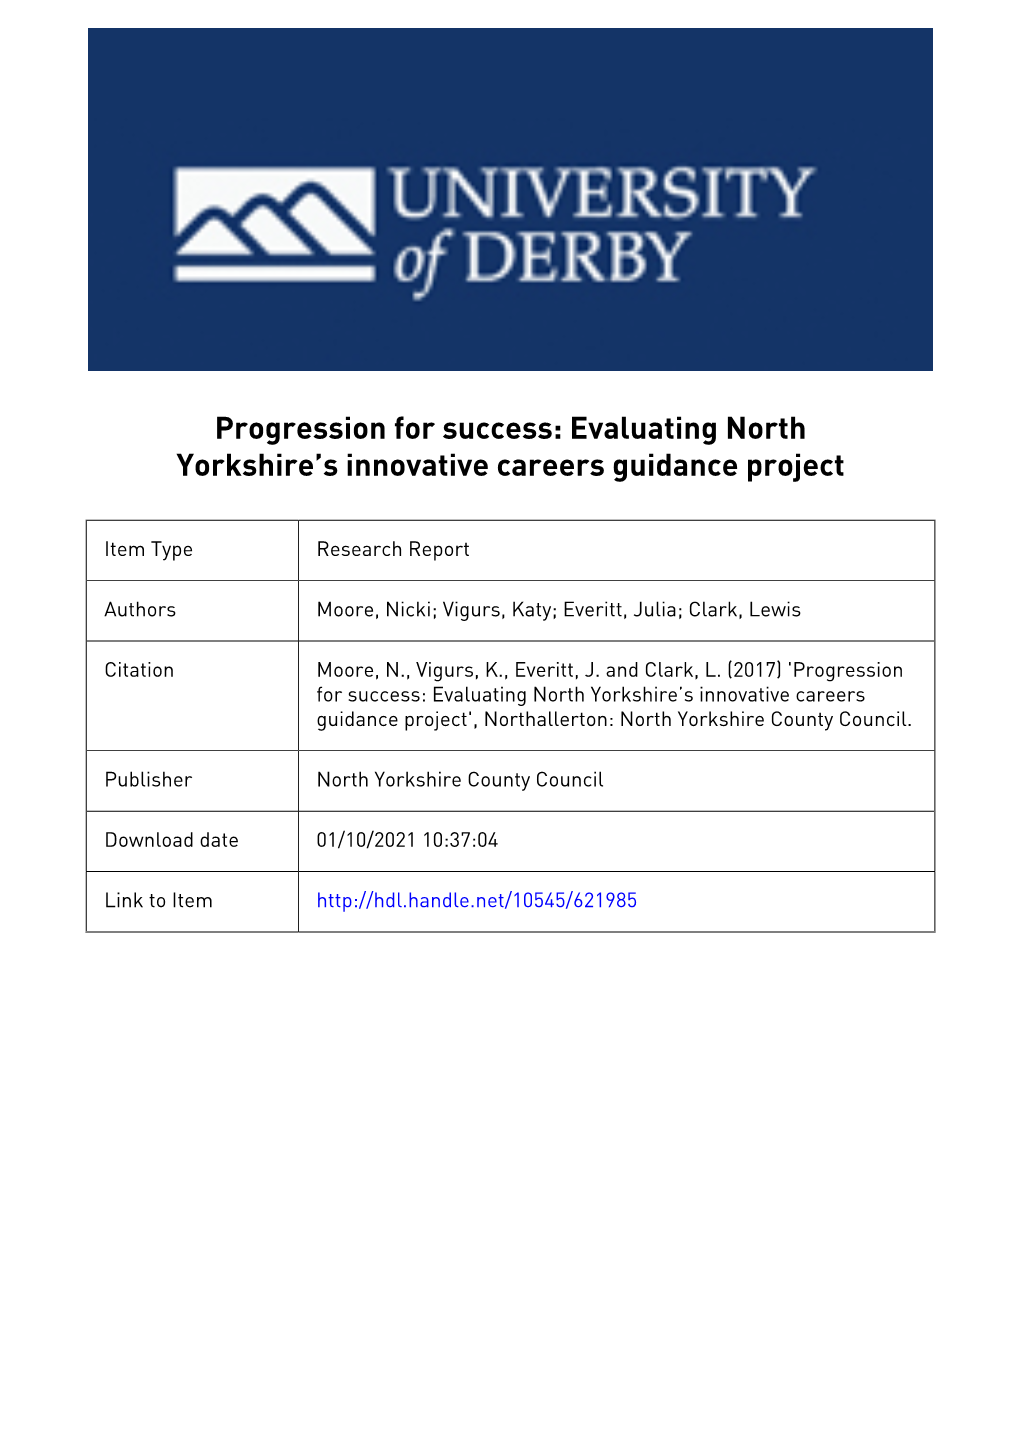 Progression for Success: Evaluating North Yorkshire's Innovative